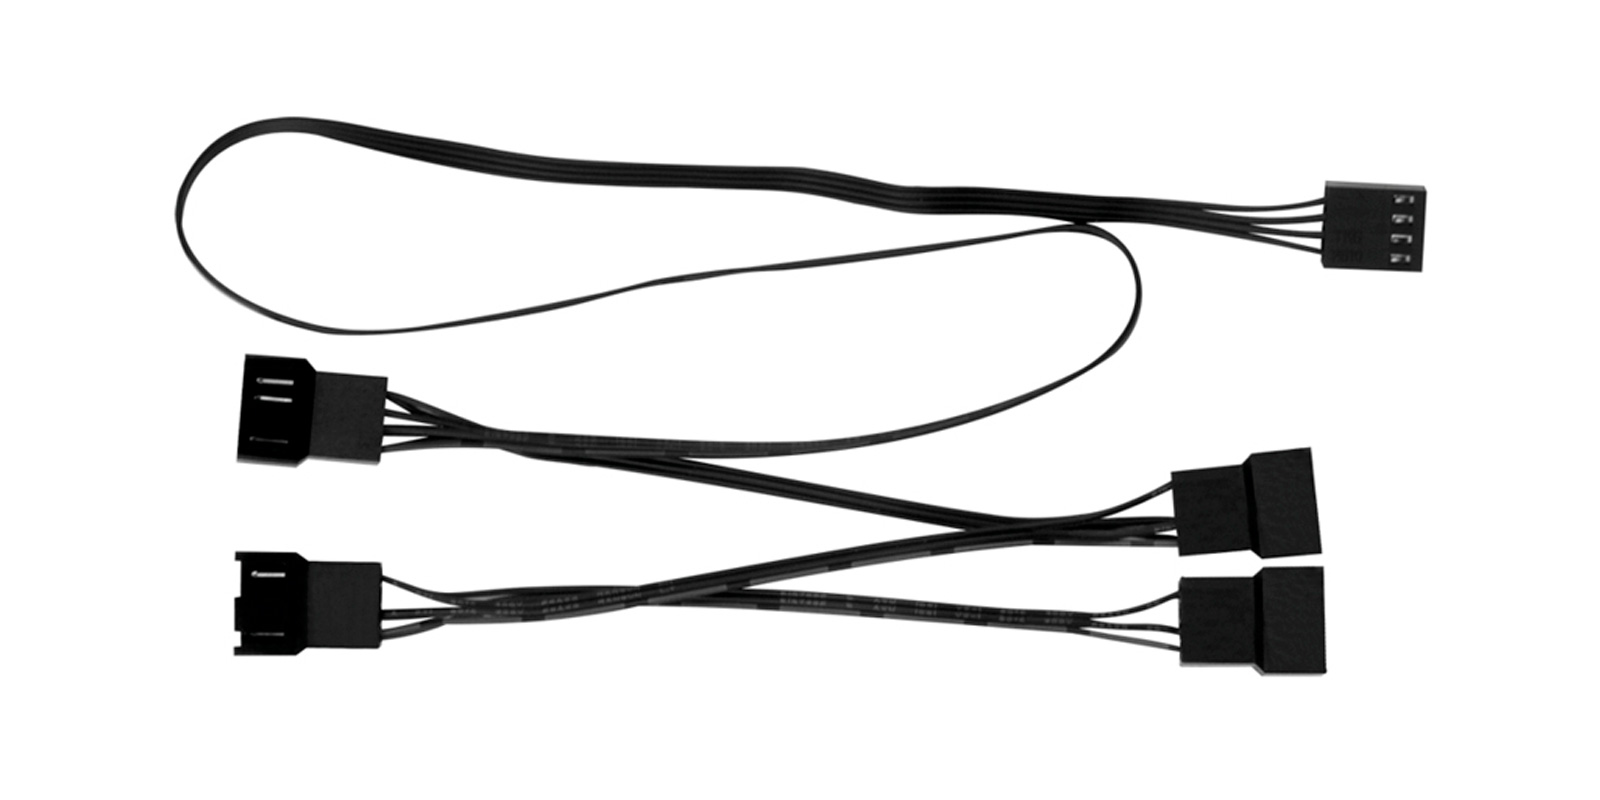 pst-cable-rev2-F01